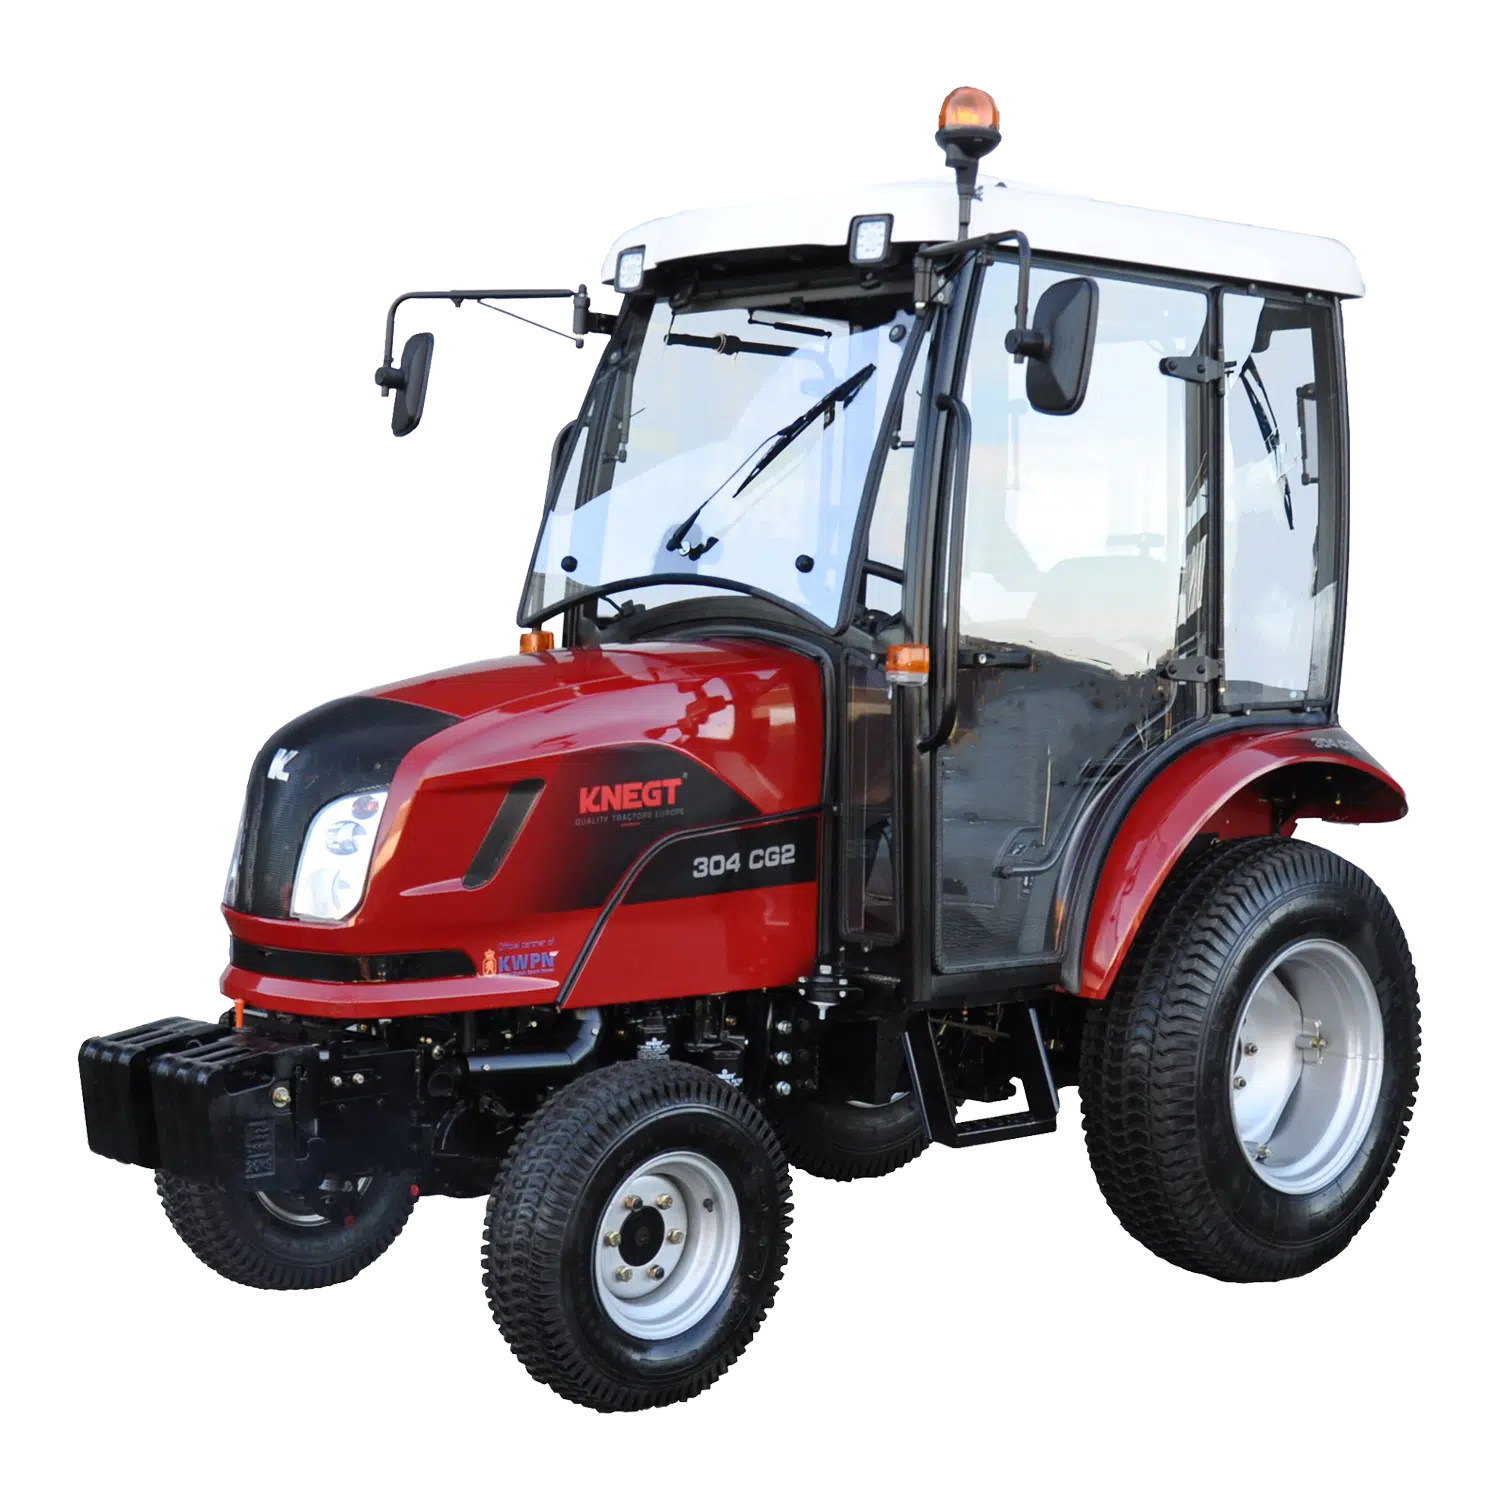 knegt_compact_tractor_productfoto_cabine